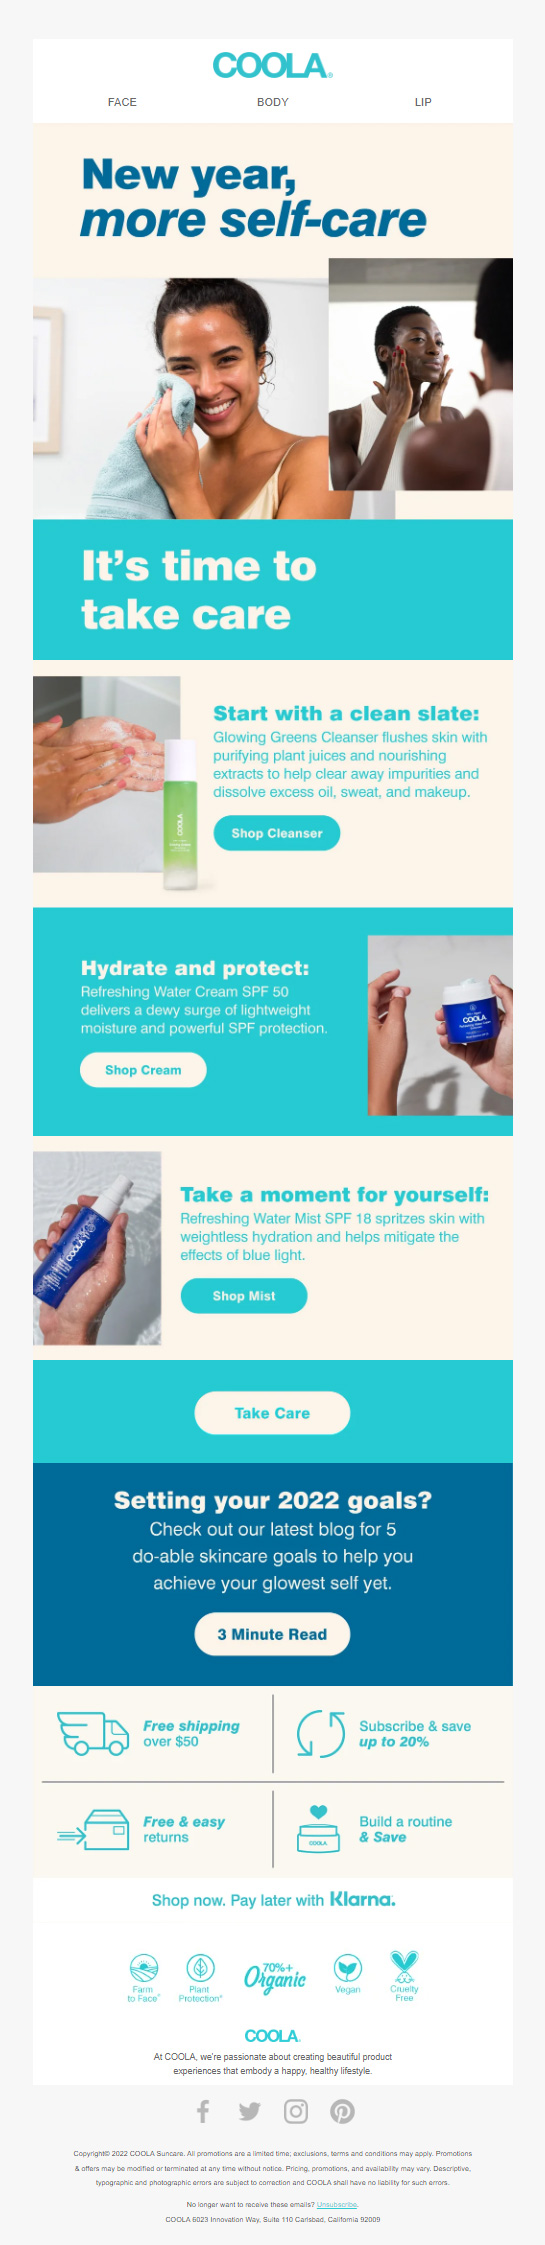 Coola- New year Email Inspiration